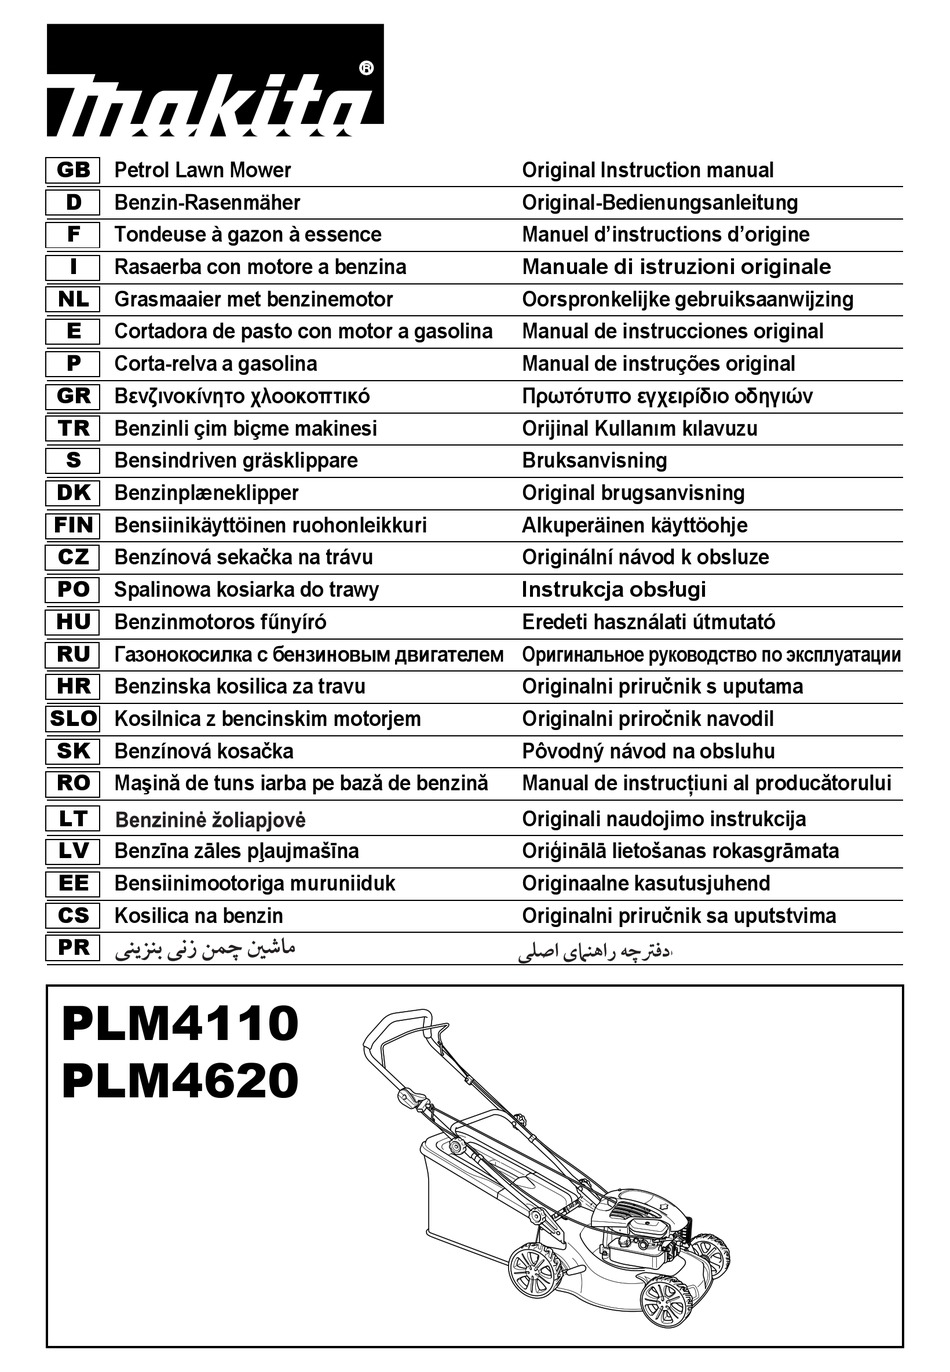 Storage Instructions - PLM4110 Manual [Page 12] |